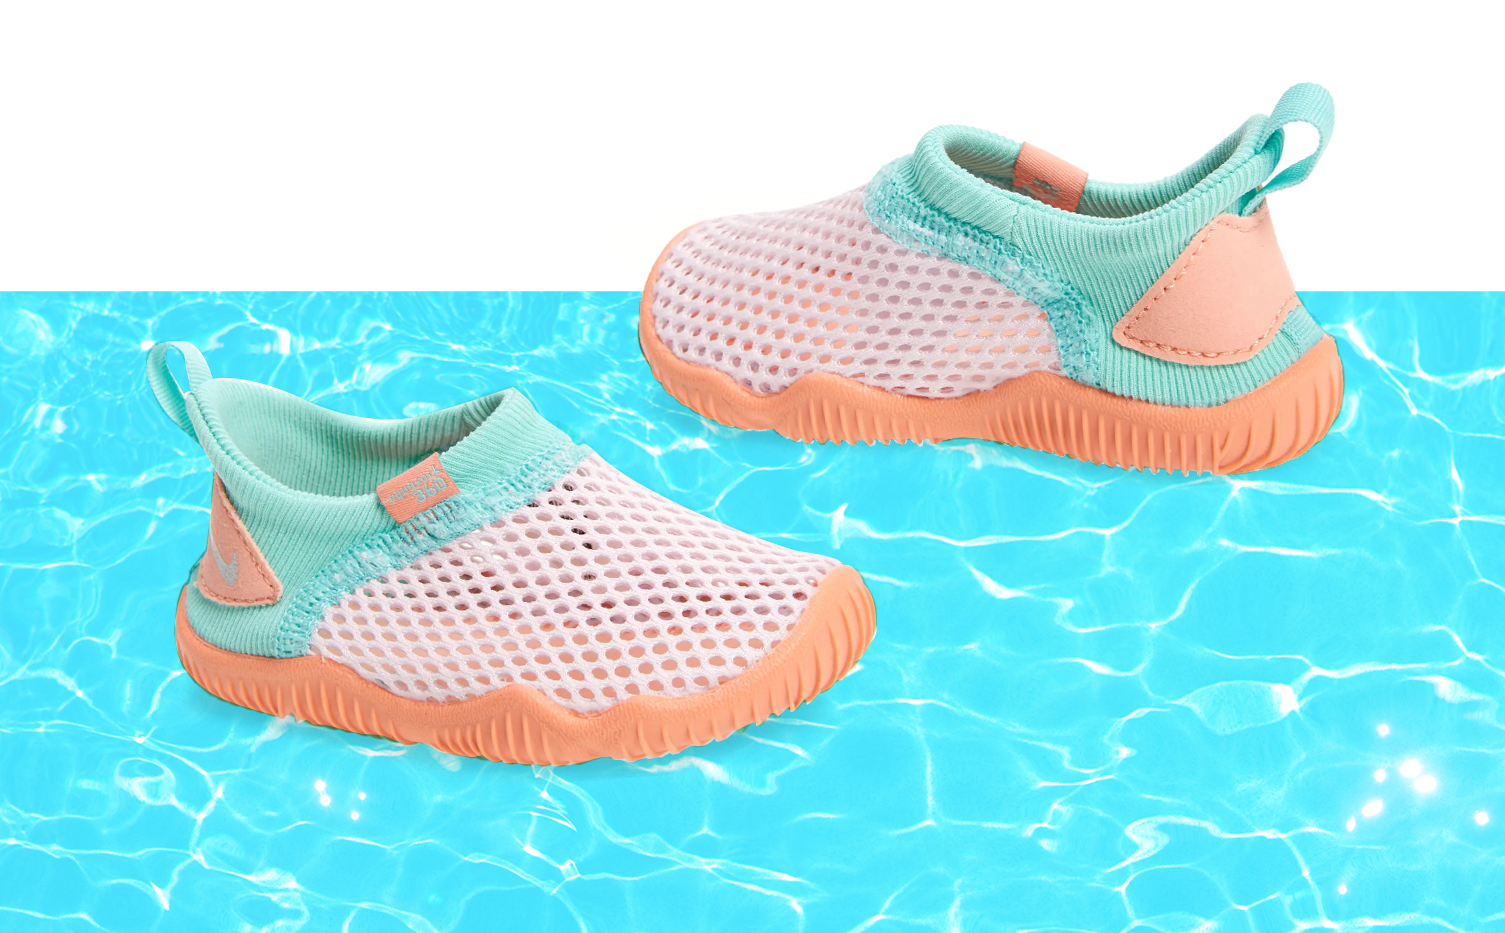 Outee Kids Adorable Printed Water Shoes 